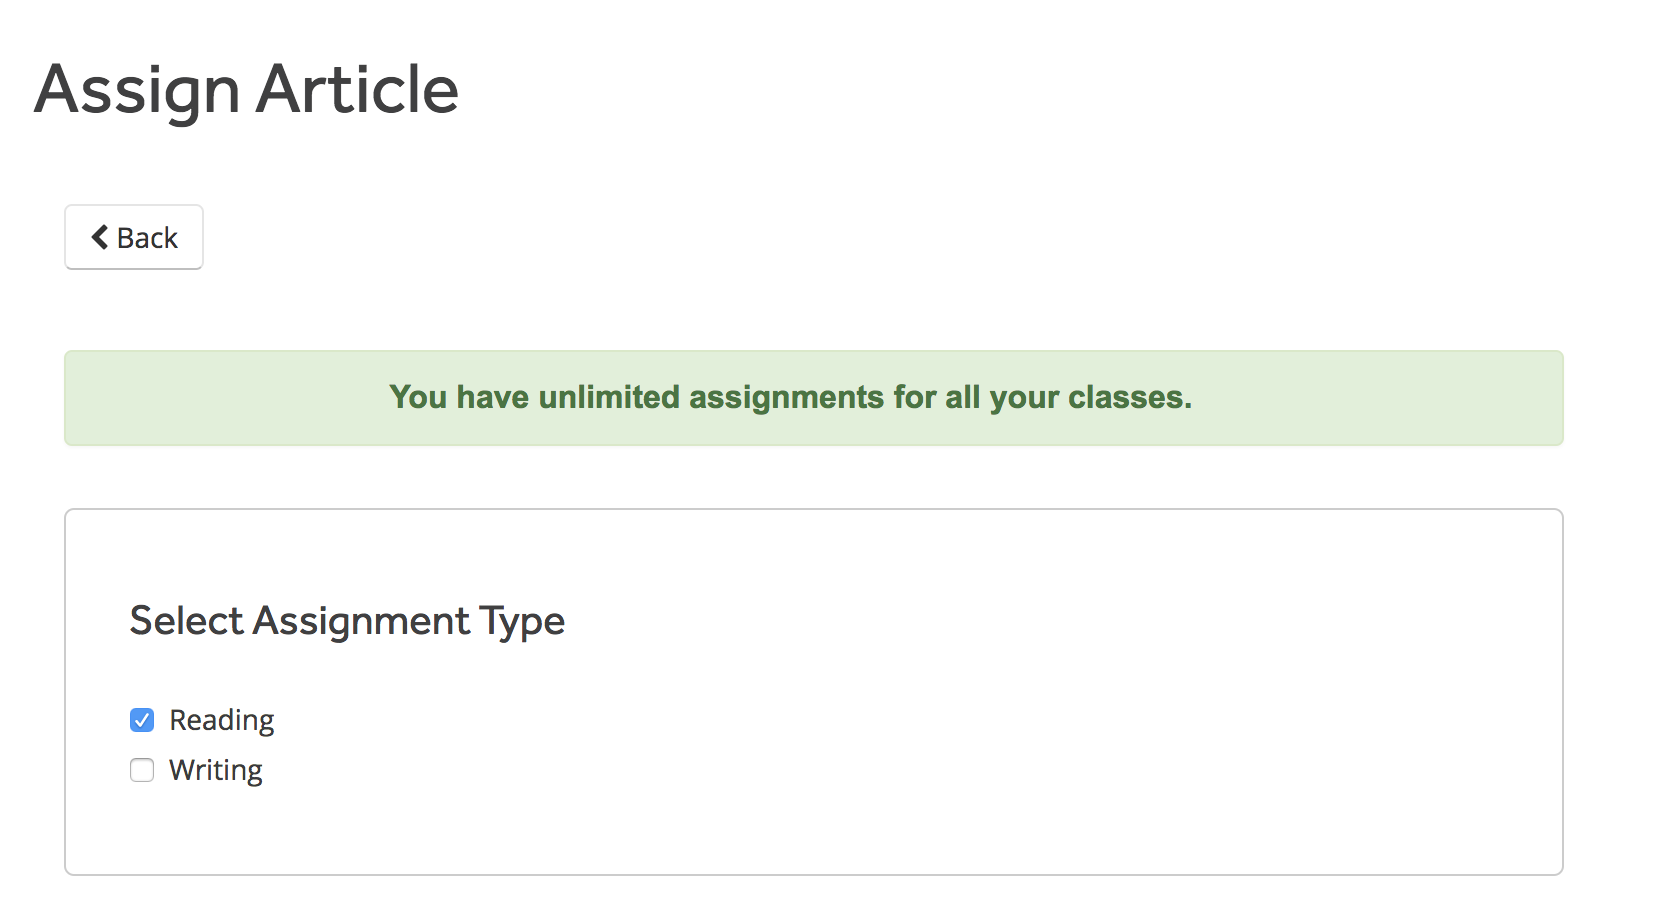 The Assign Article page, where you can choose the assignment type.